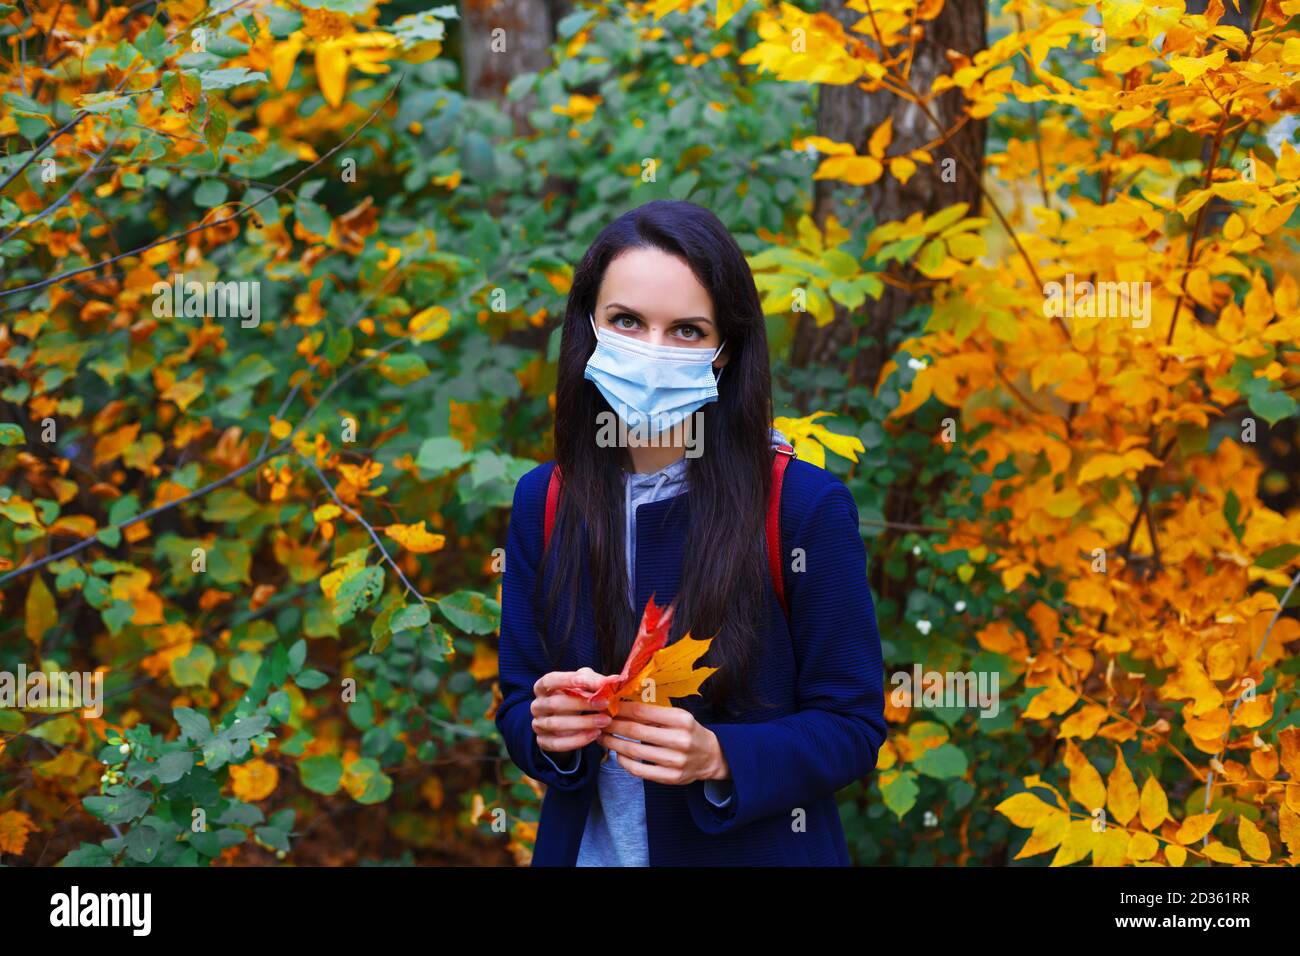 Beautiful woman in protective mask holding maple leaves in colorful autumn forest. New normal concept. Stock Photo